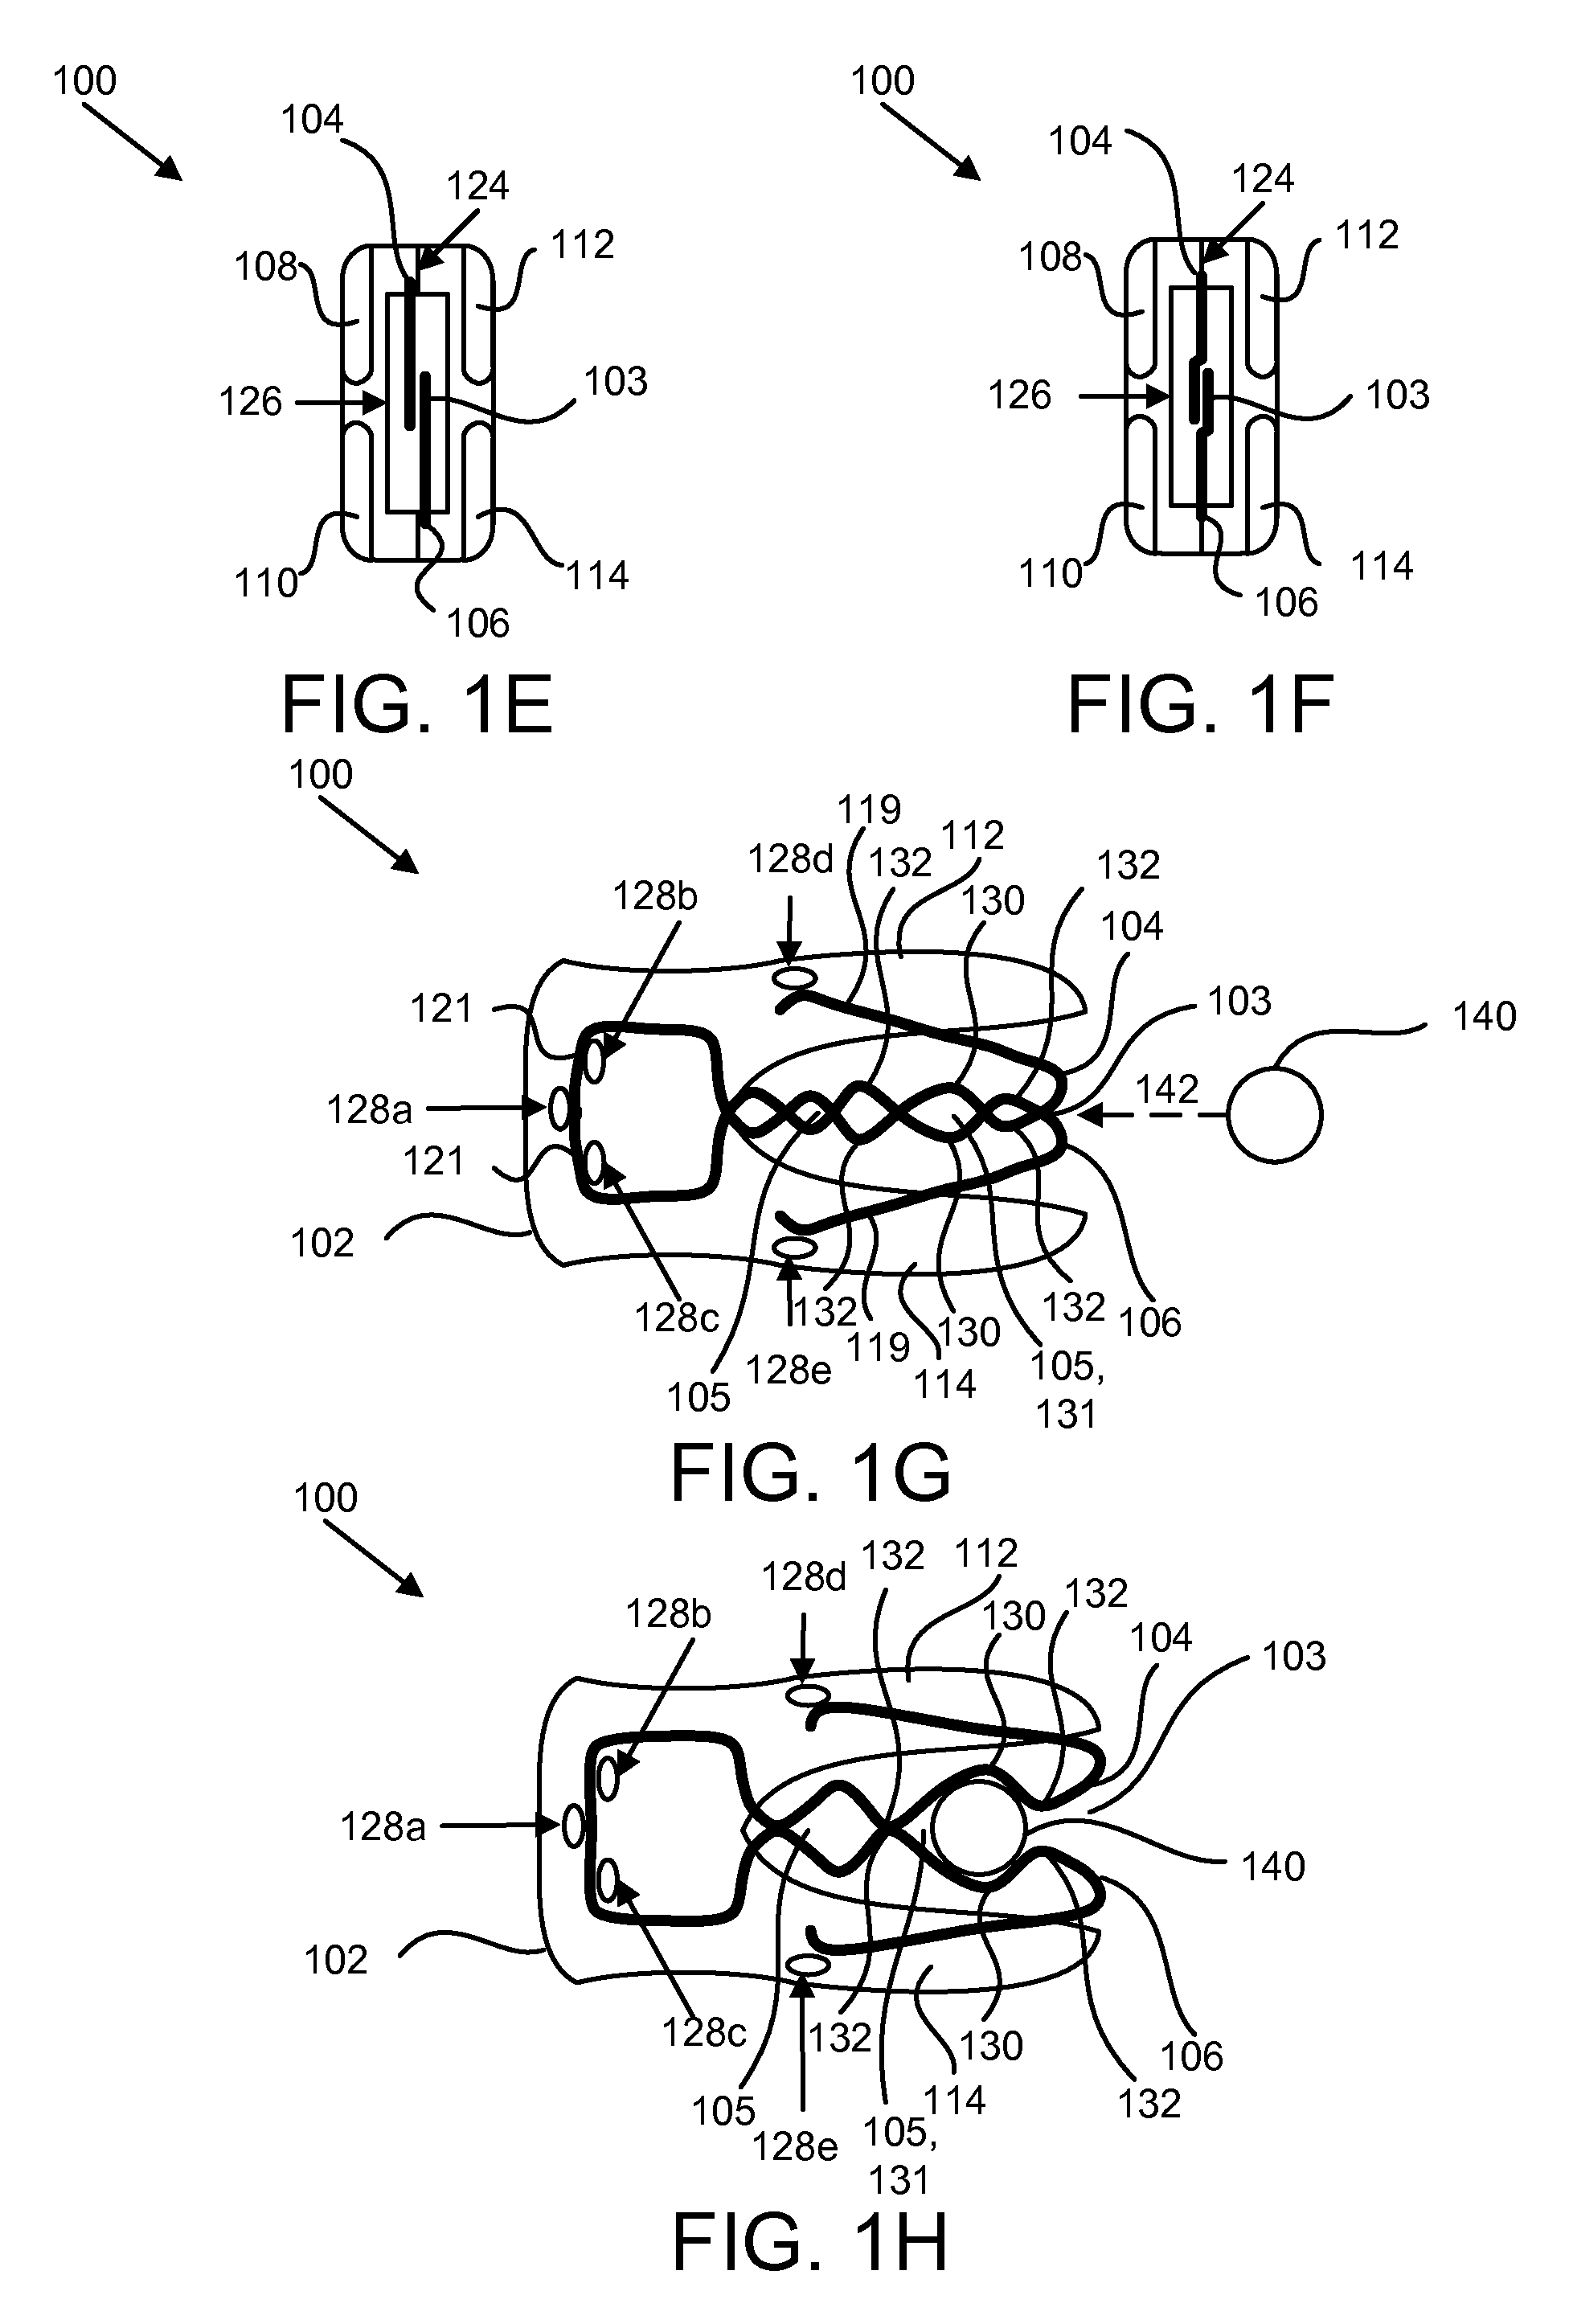 Apparatus, system, and method for creating an electrical connection to a tool